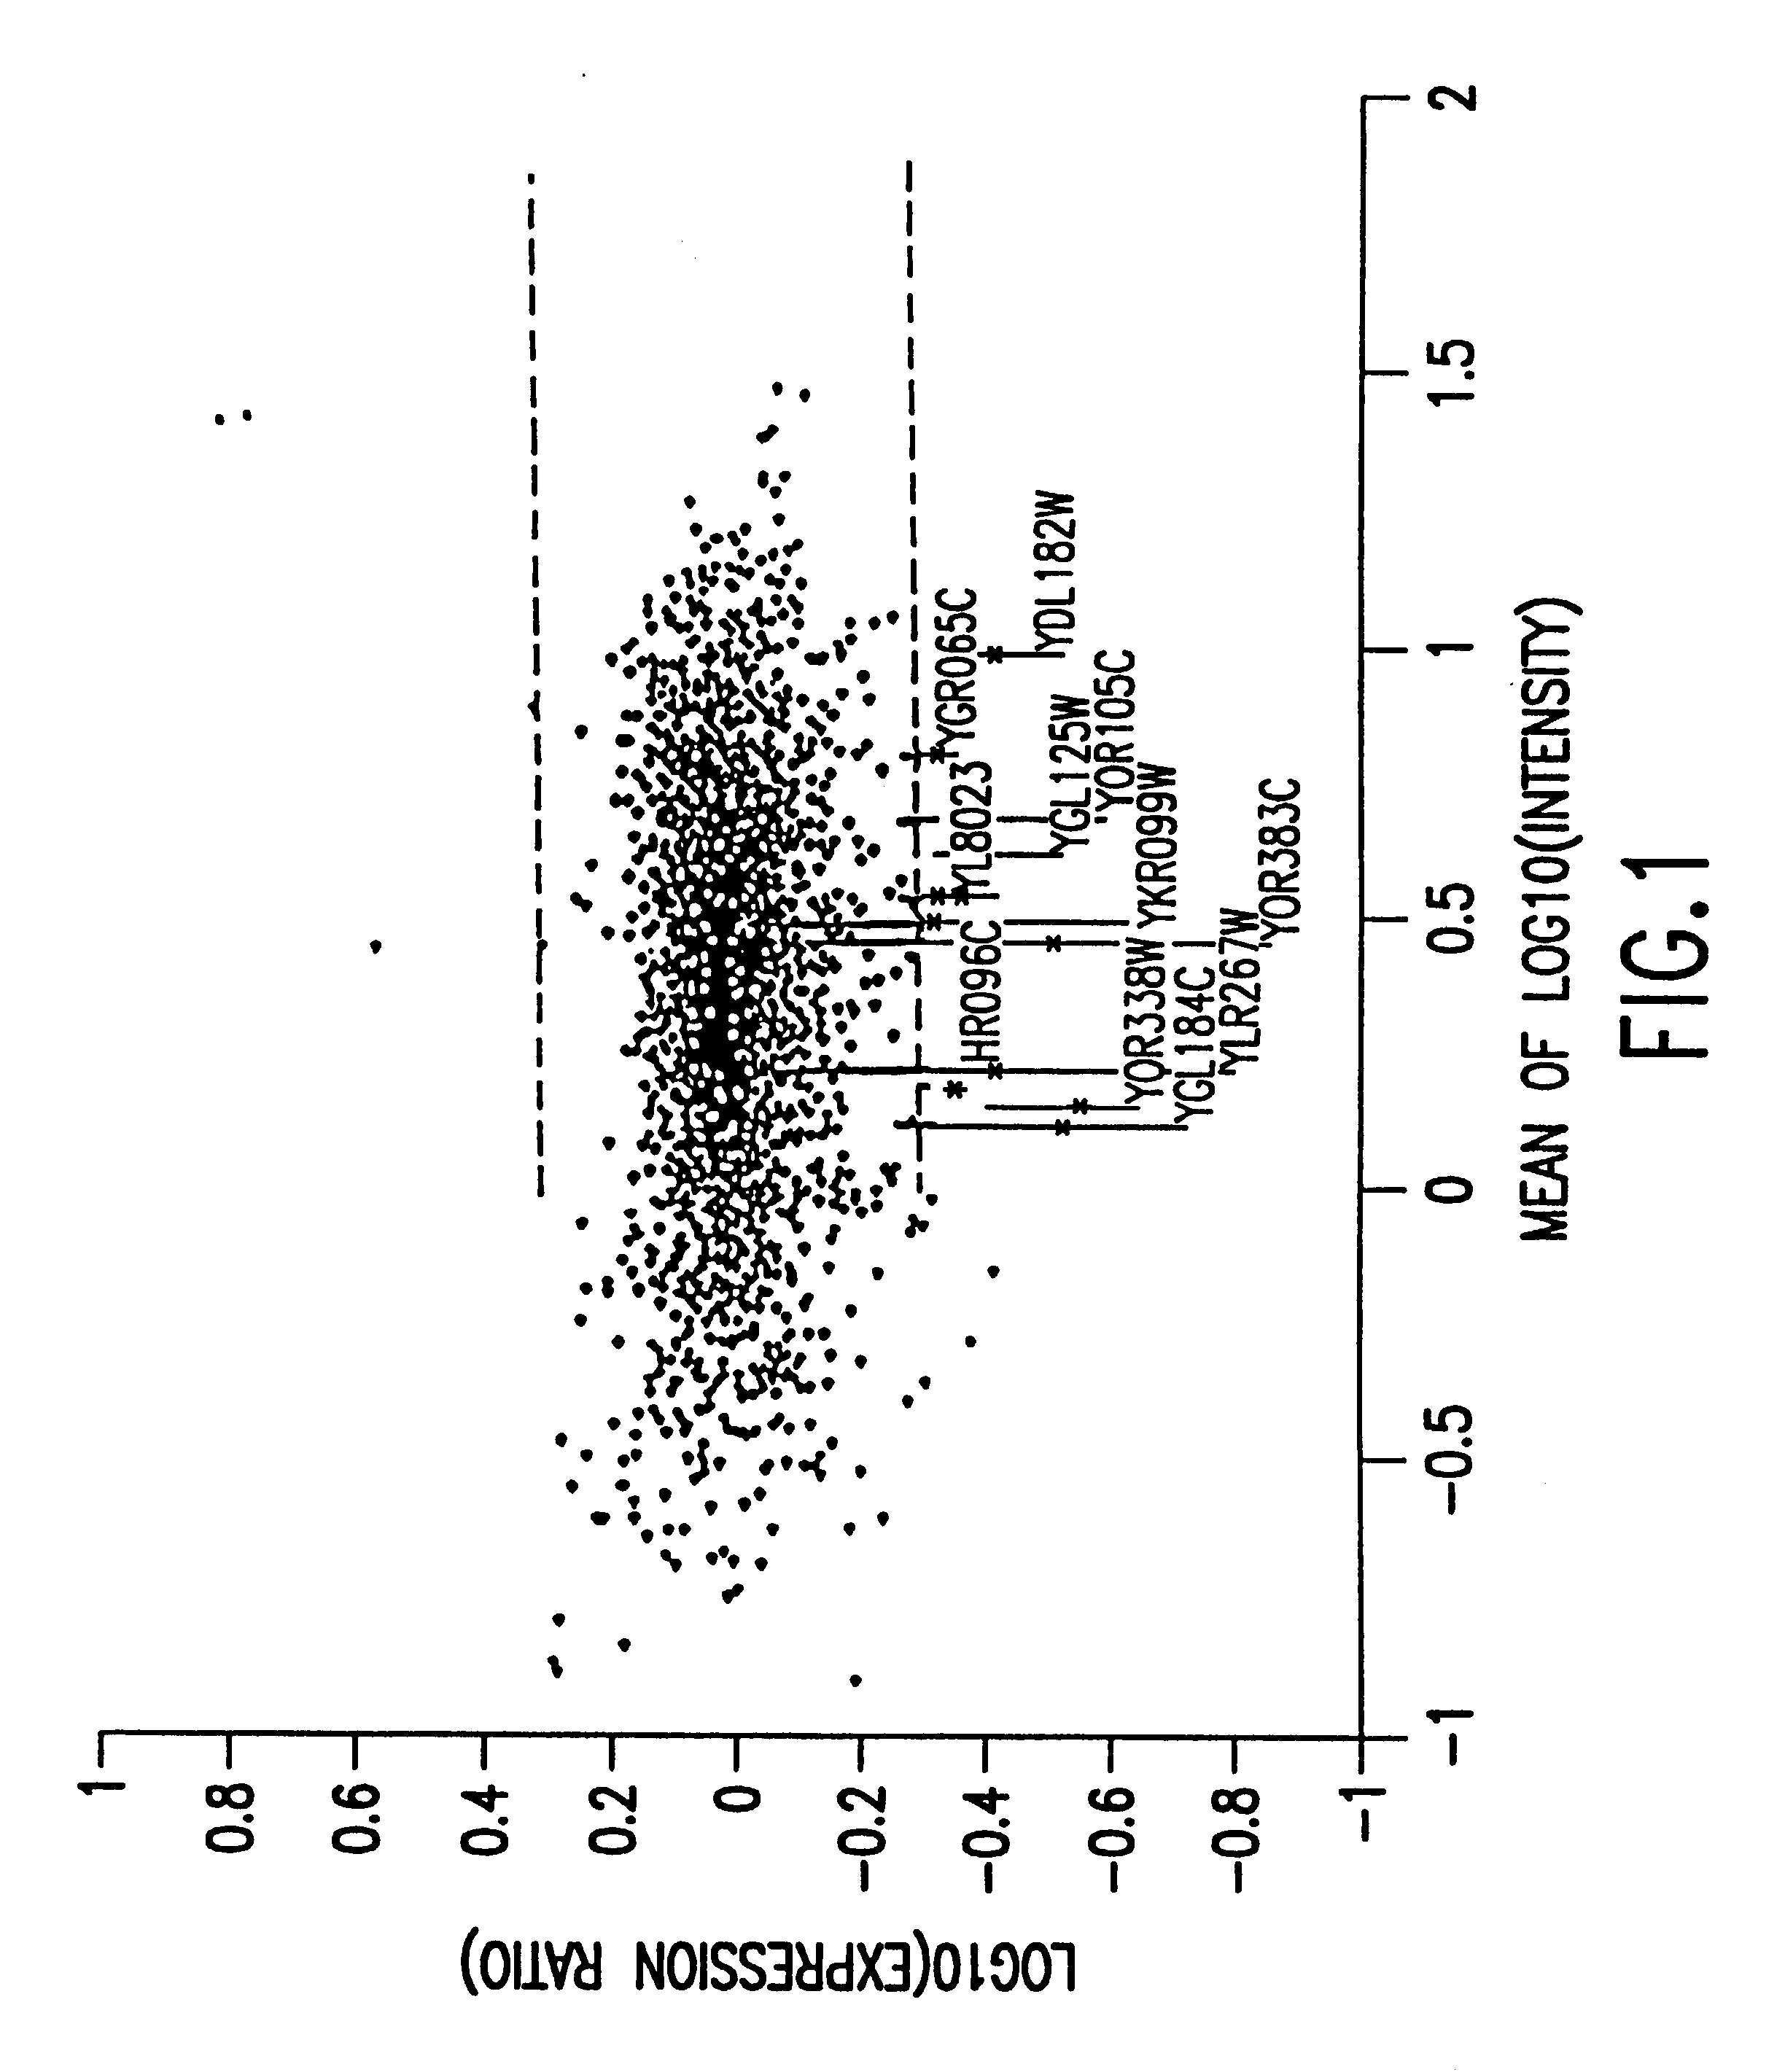 Methods of determining protein activity levels using gene expression profiles